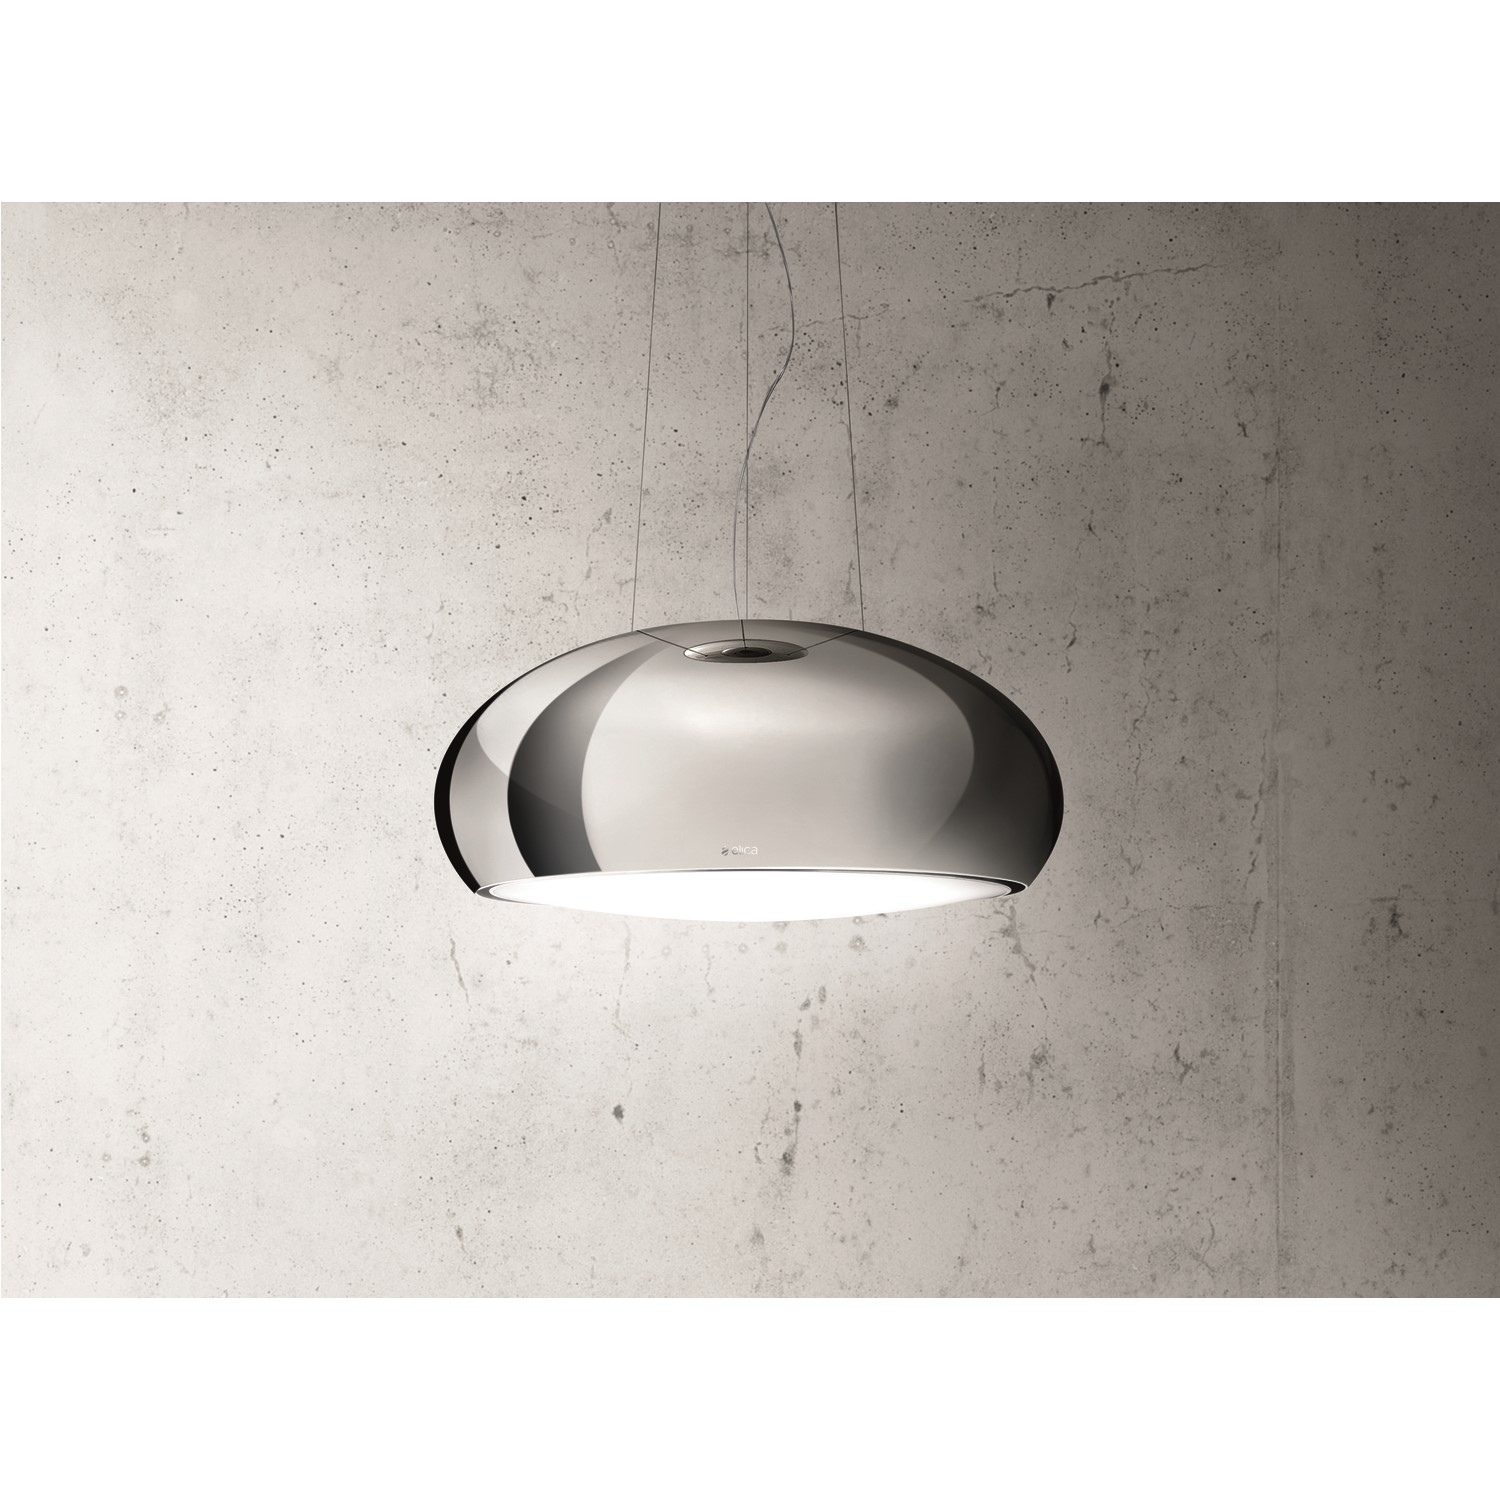 Elica Pearl Ss 80cm Ceiling Mounted Island Decorative Cooker Hood Stainless Steel